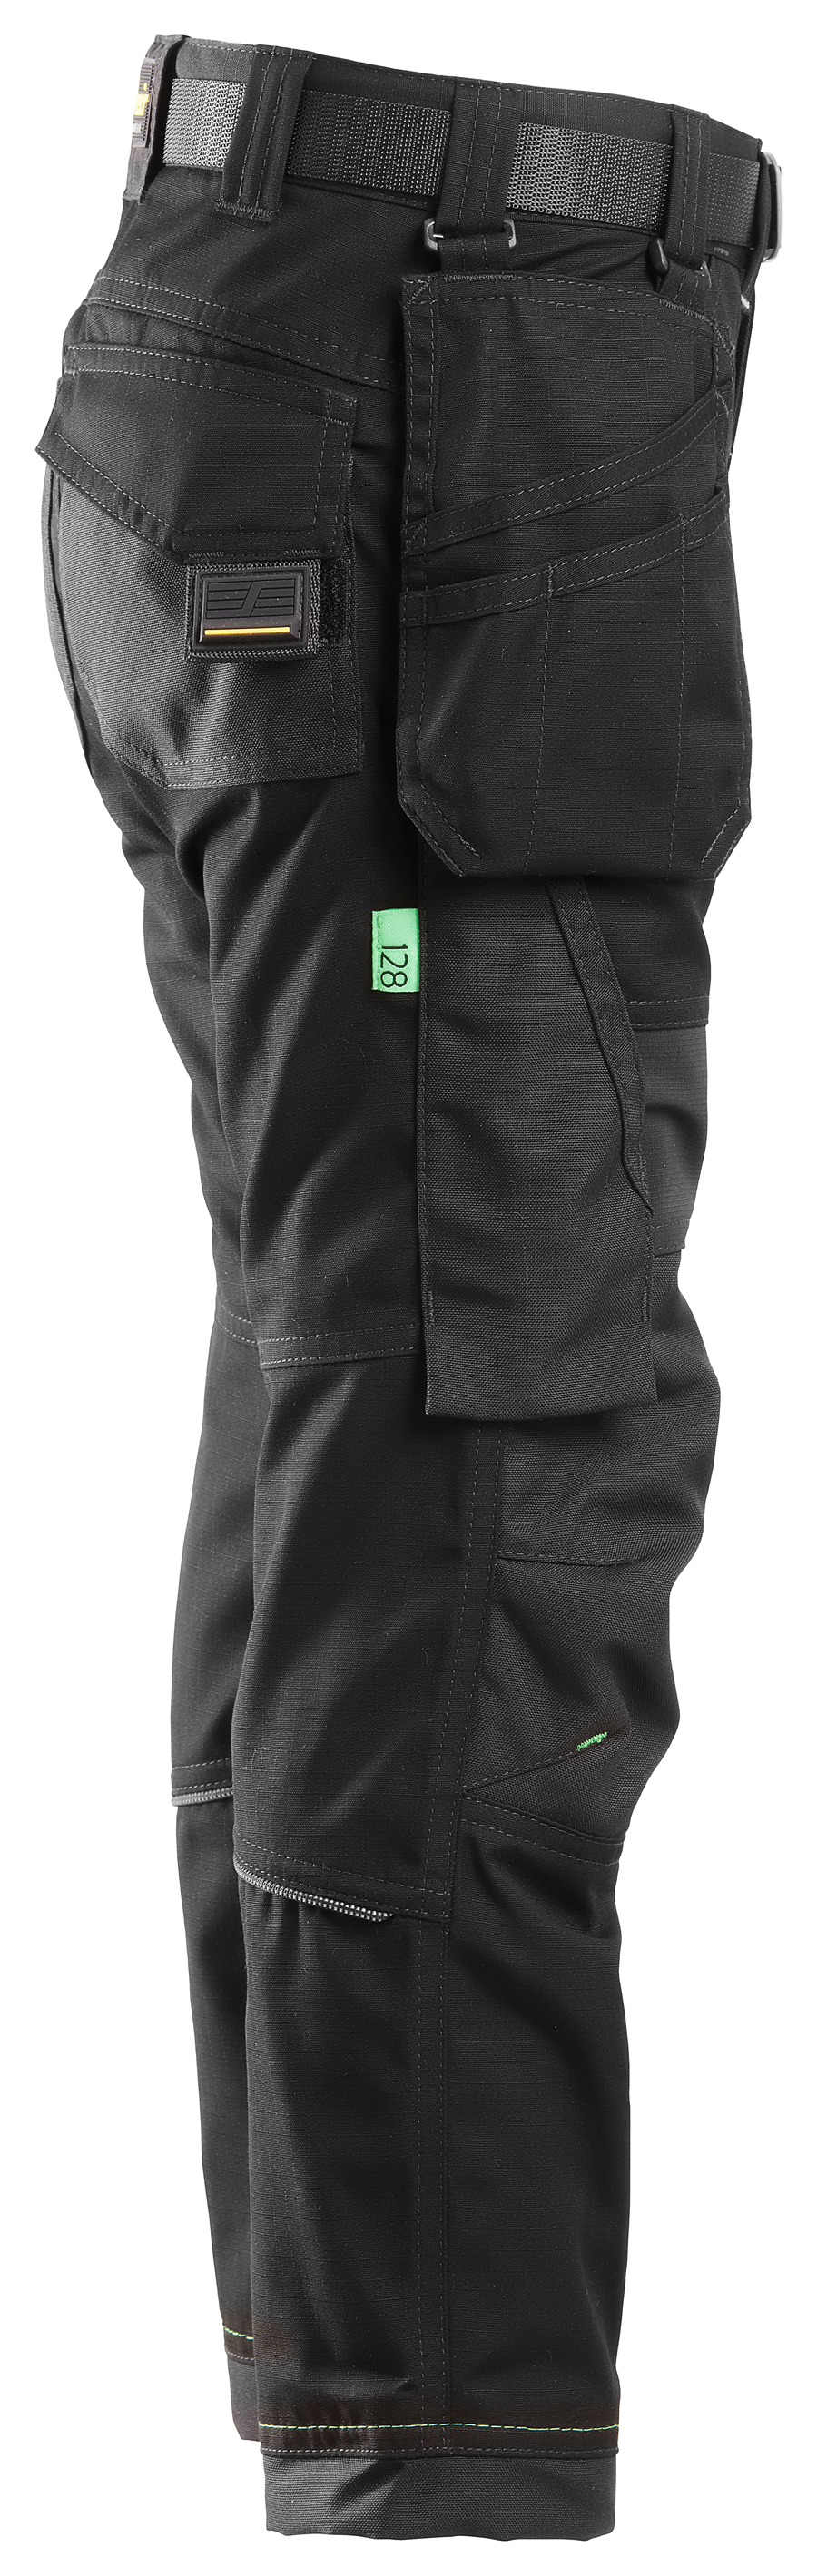 Snickers Workwear 7505 Junior Trousers Black Side View